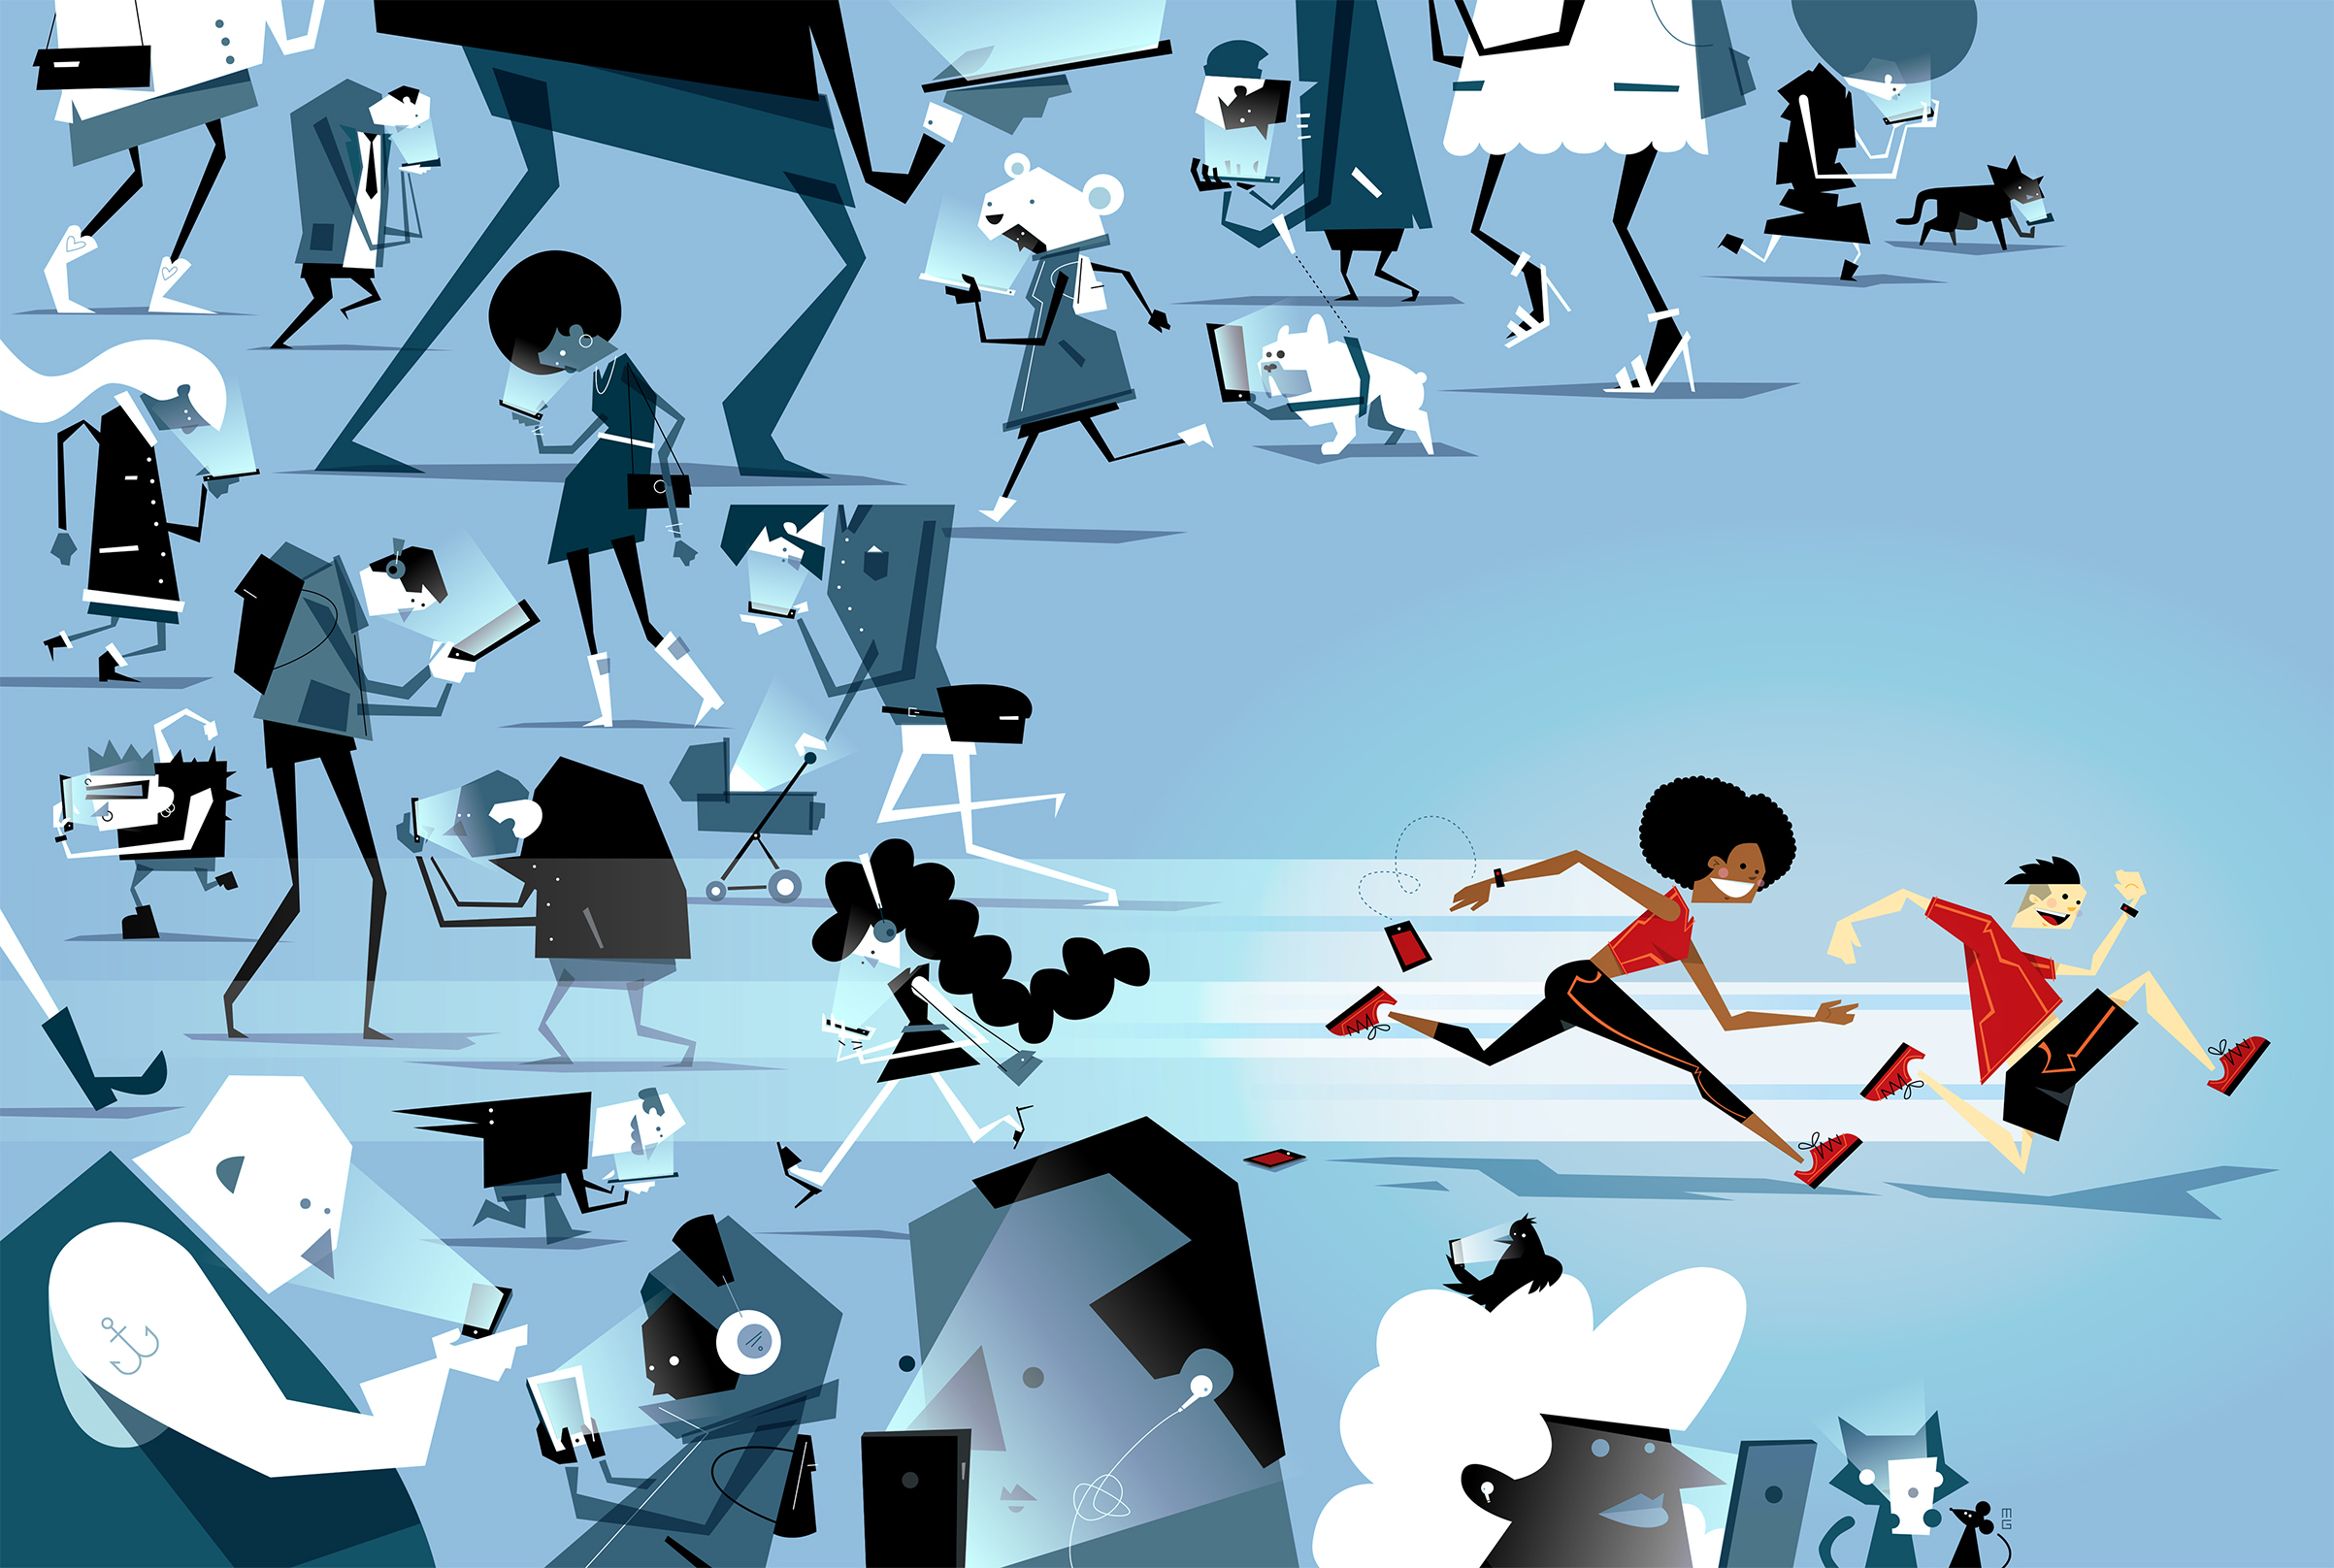 New apps can push better habits, more transparency (Illustration by Martin Gee for TIME)